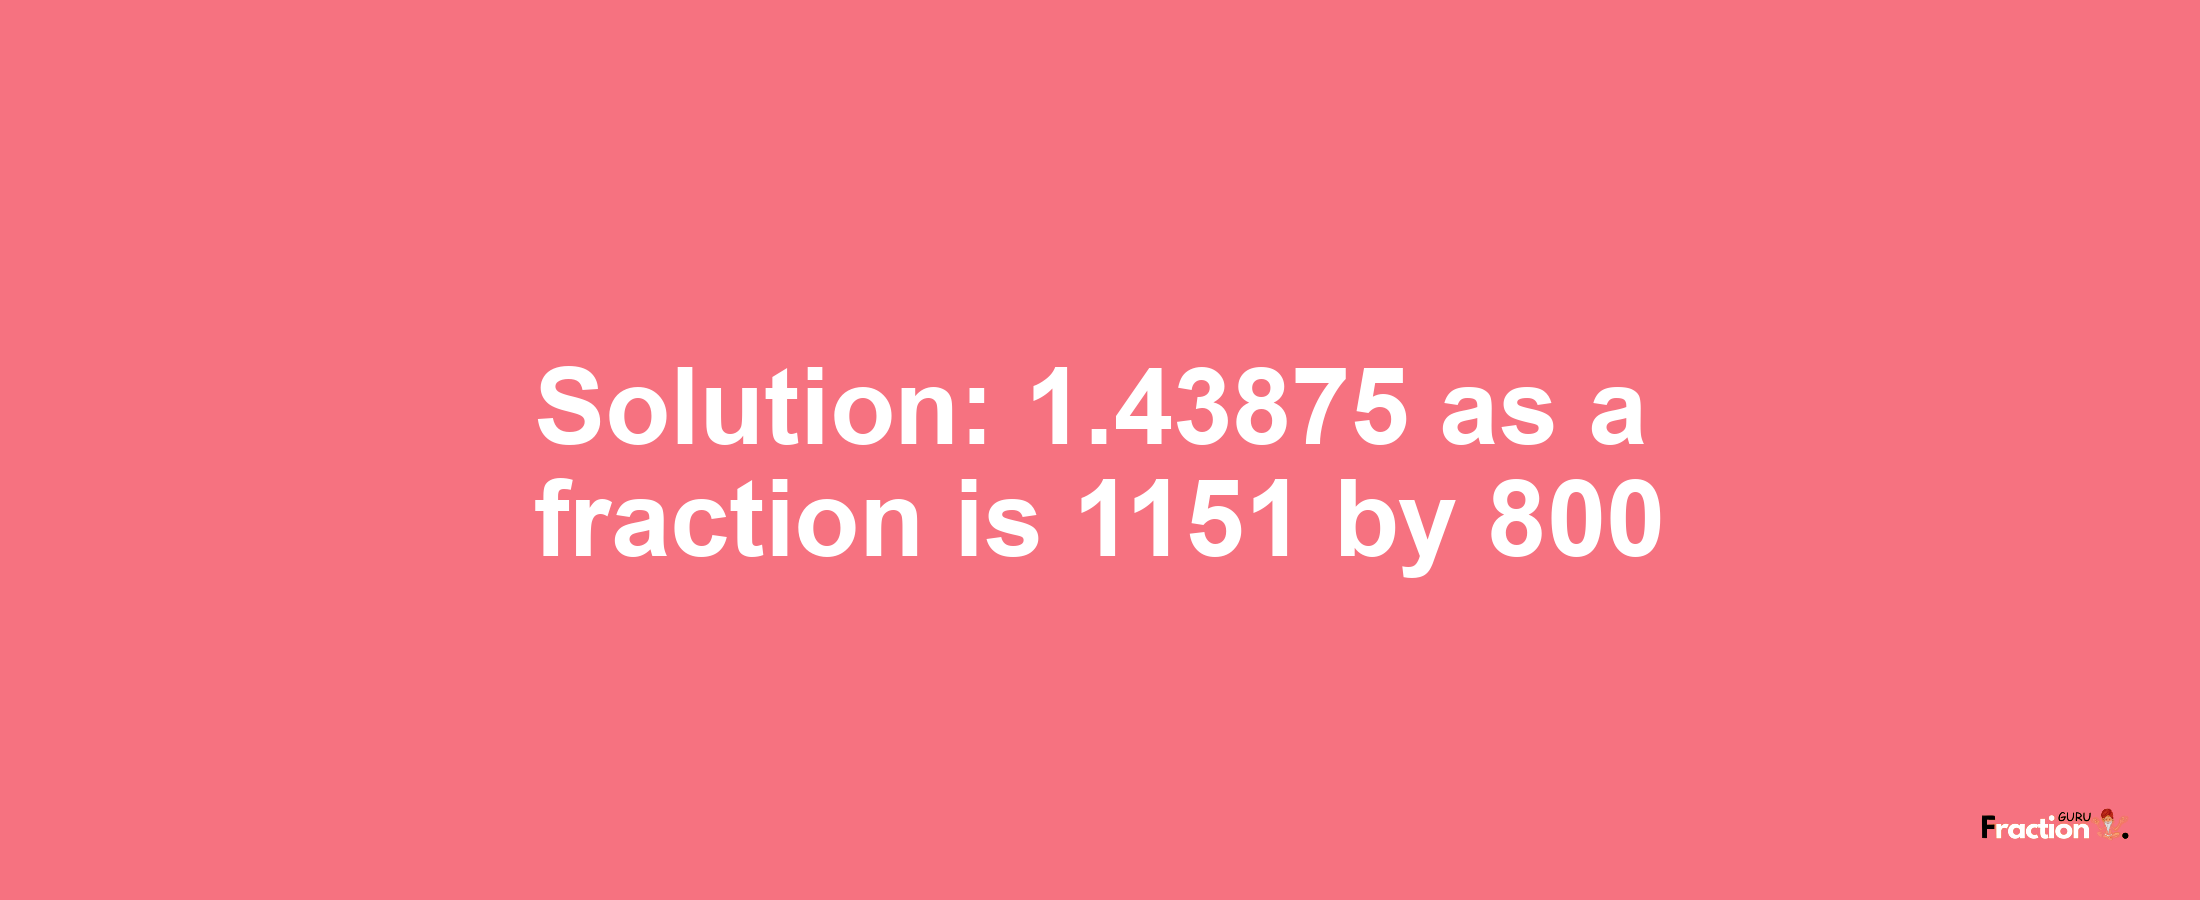 Solution:1.43875 as a fraction is 1151/800